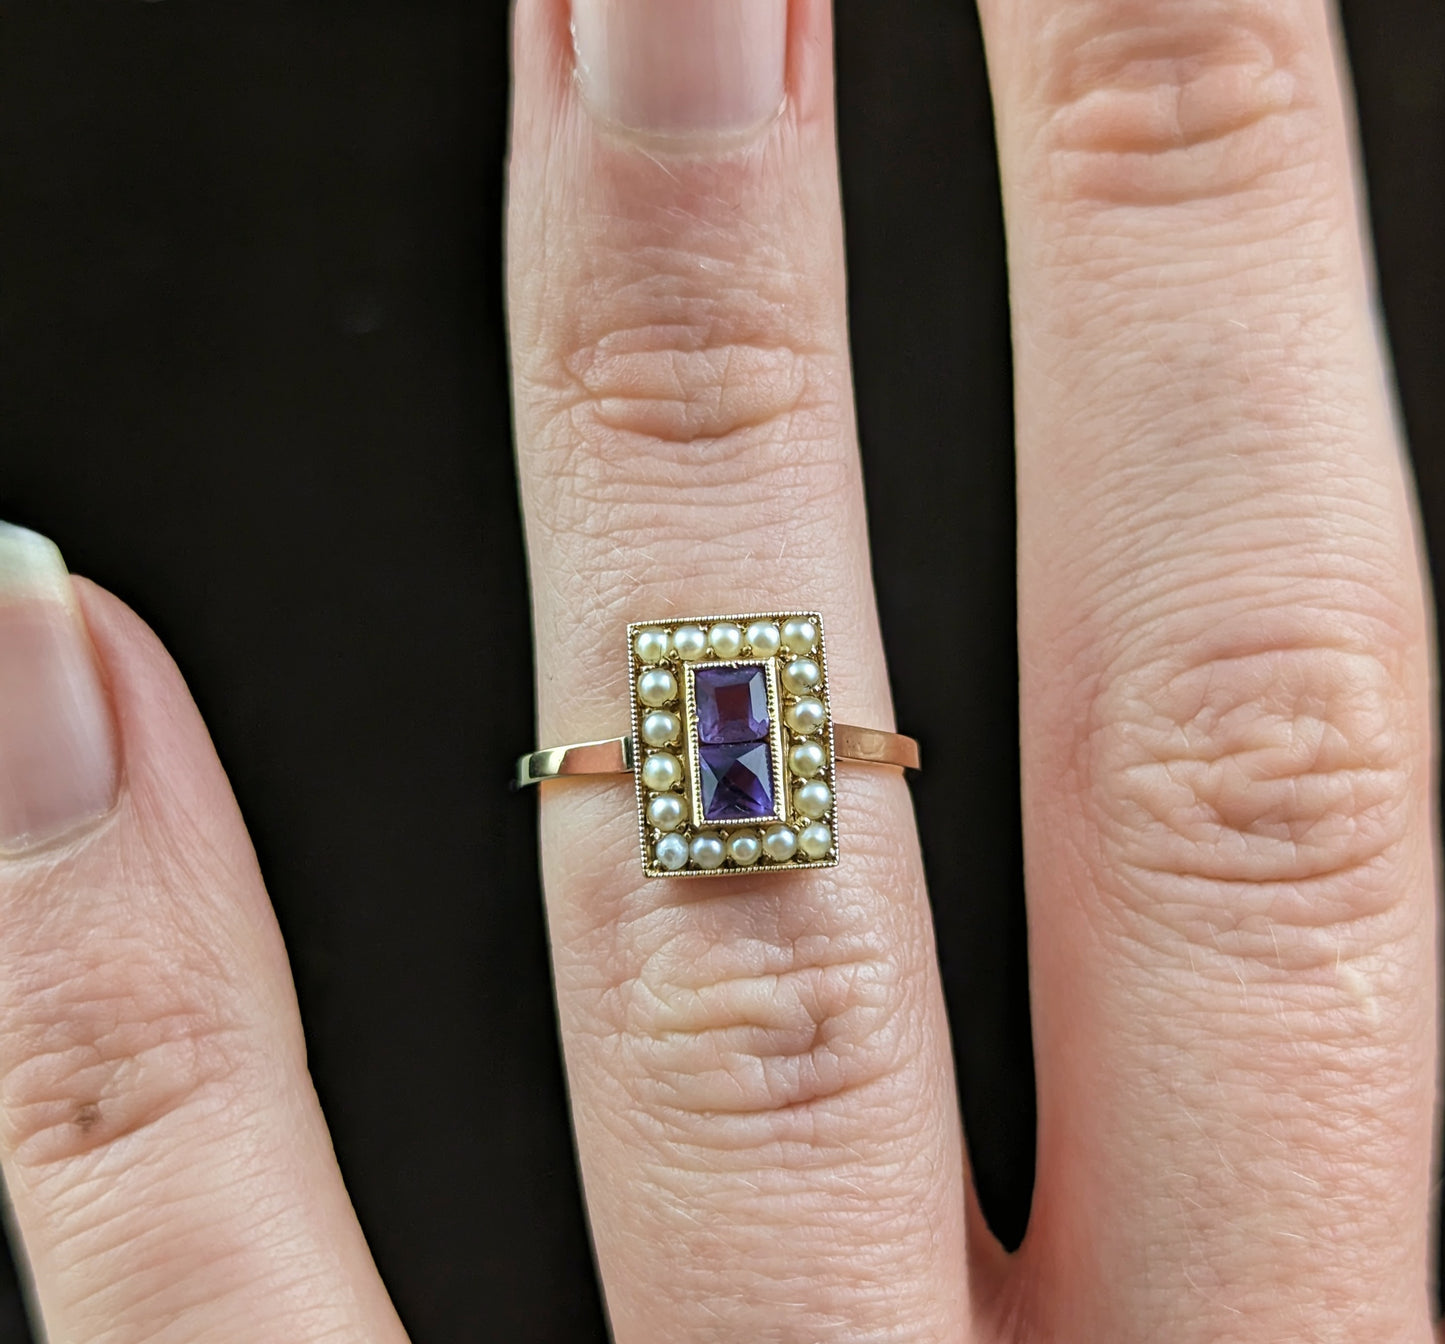 Antique Amethyst and Pearl cluster ring, 18ct gold